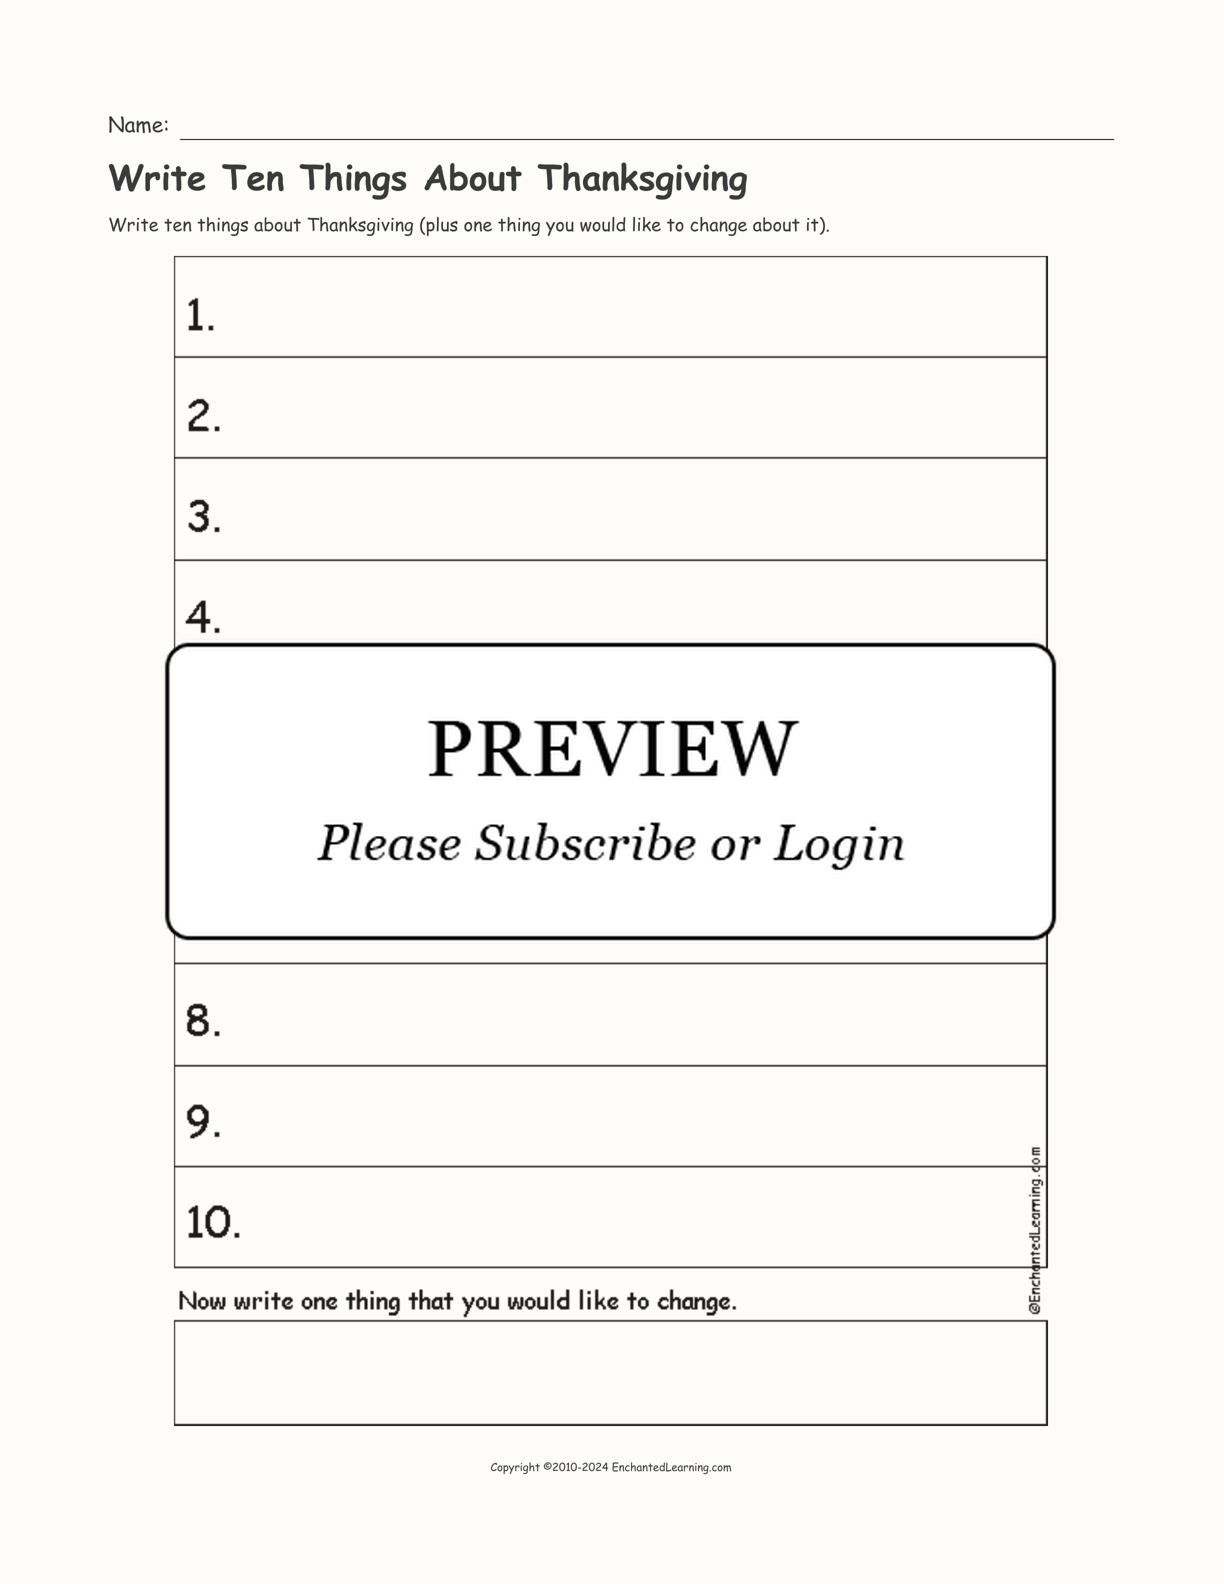 Write Ten Things About Thanksgiving interactive worksheet page 1